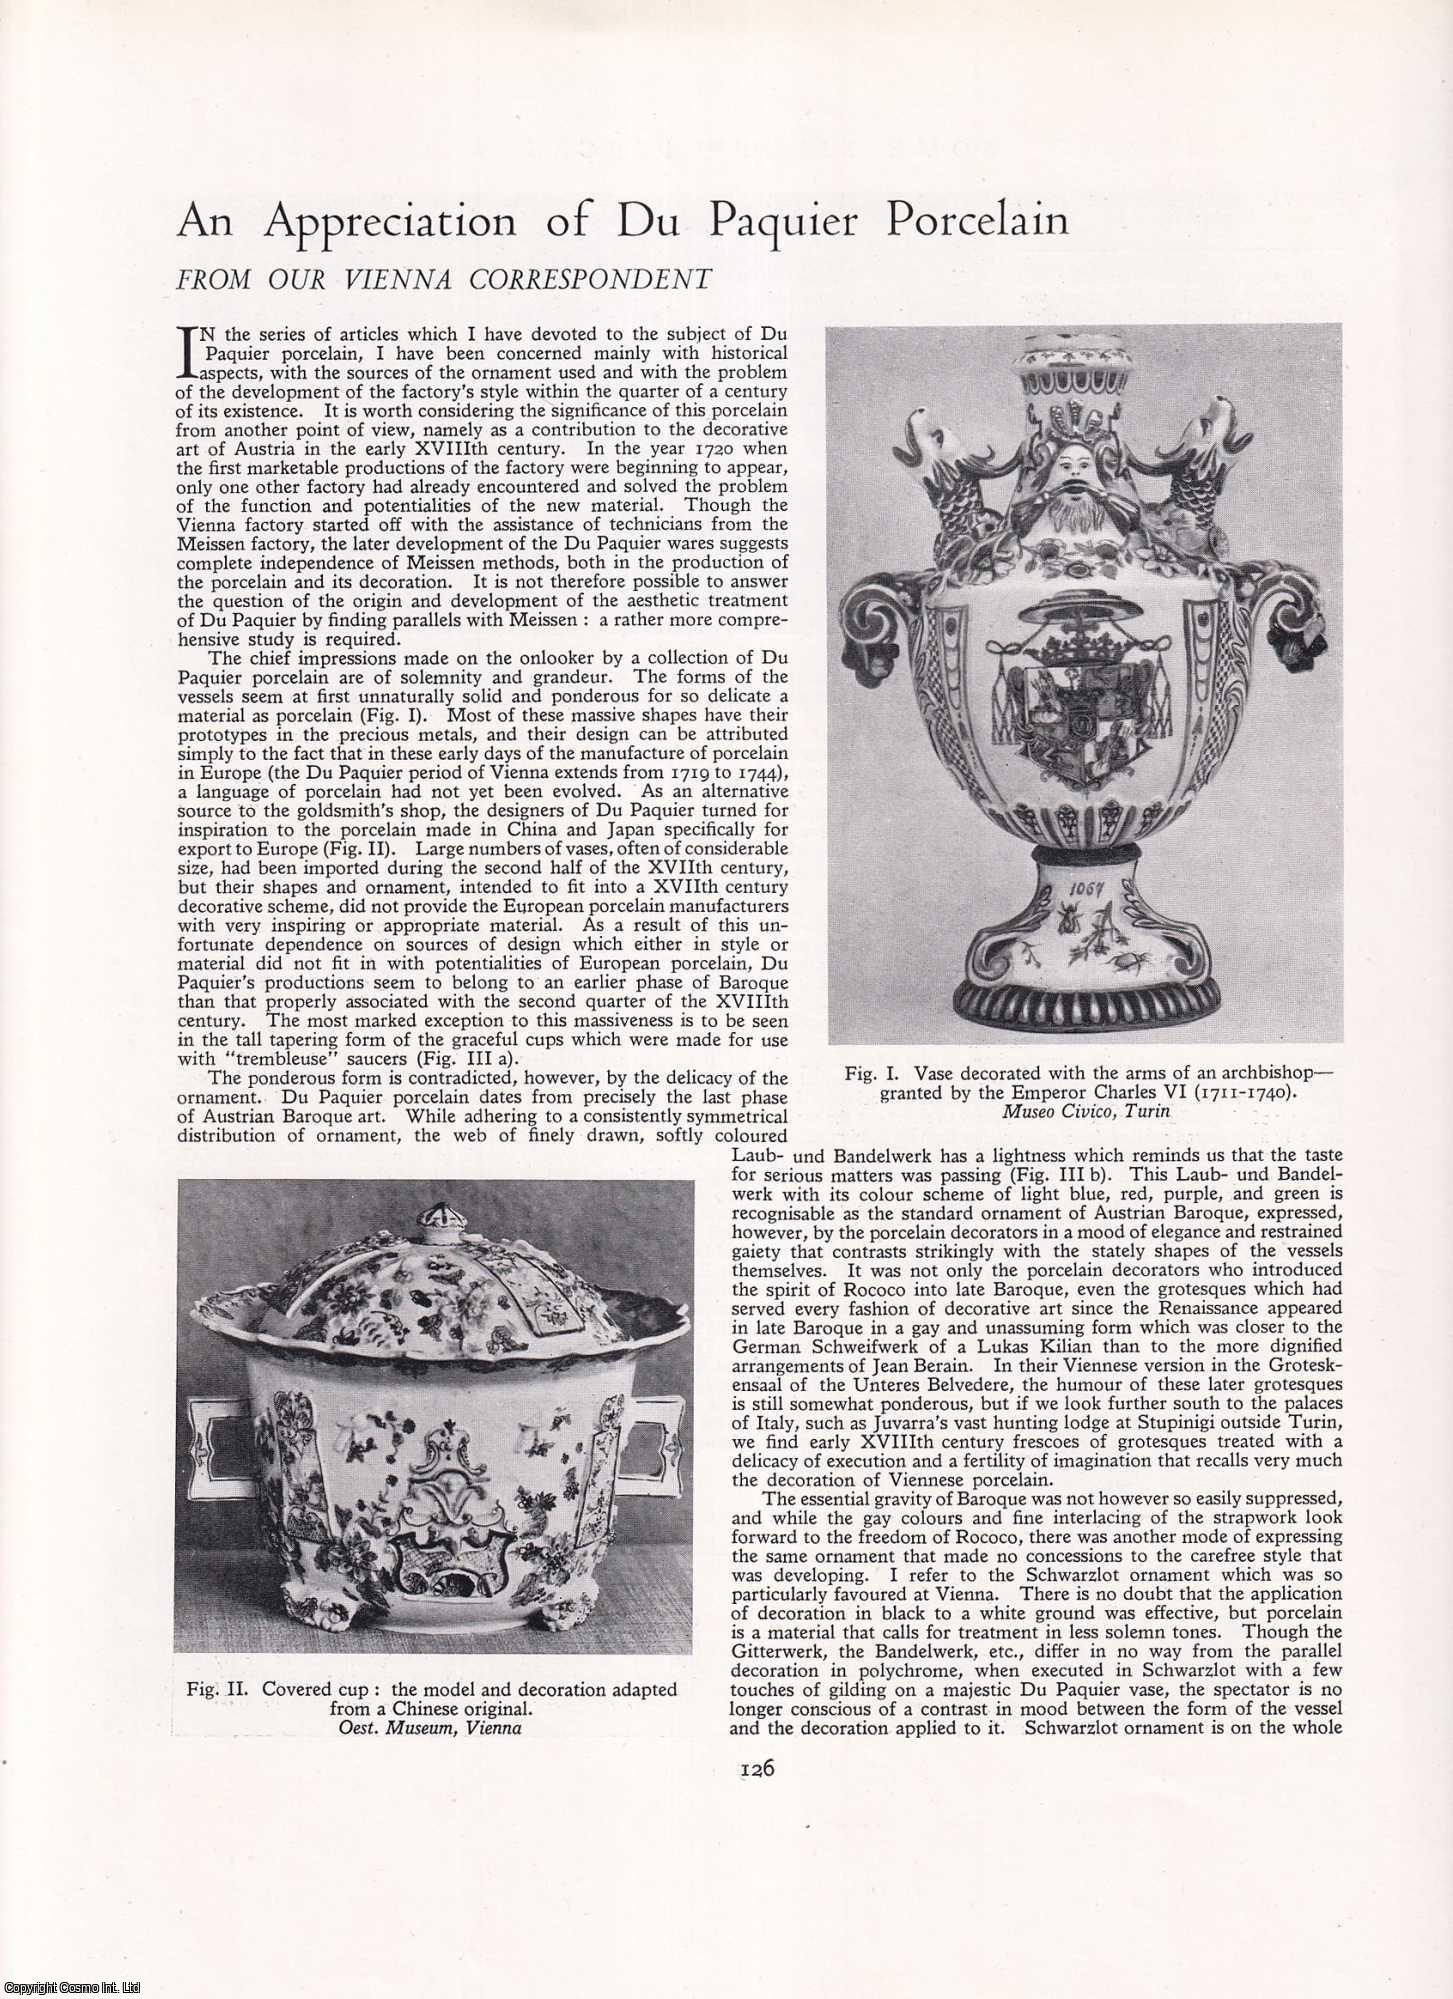 Not stated - An Appreciation of Du Paquier Porcelain. An original article from Apollo, International Magazine of the Arts, 1948.